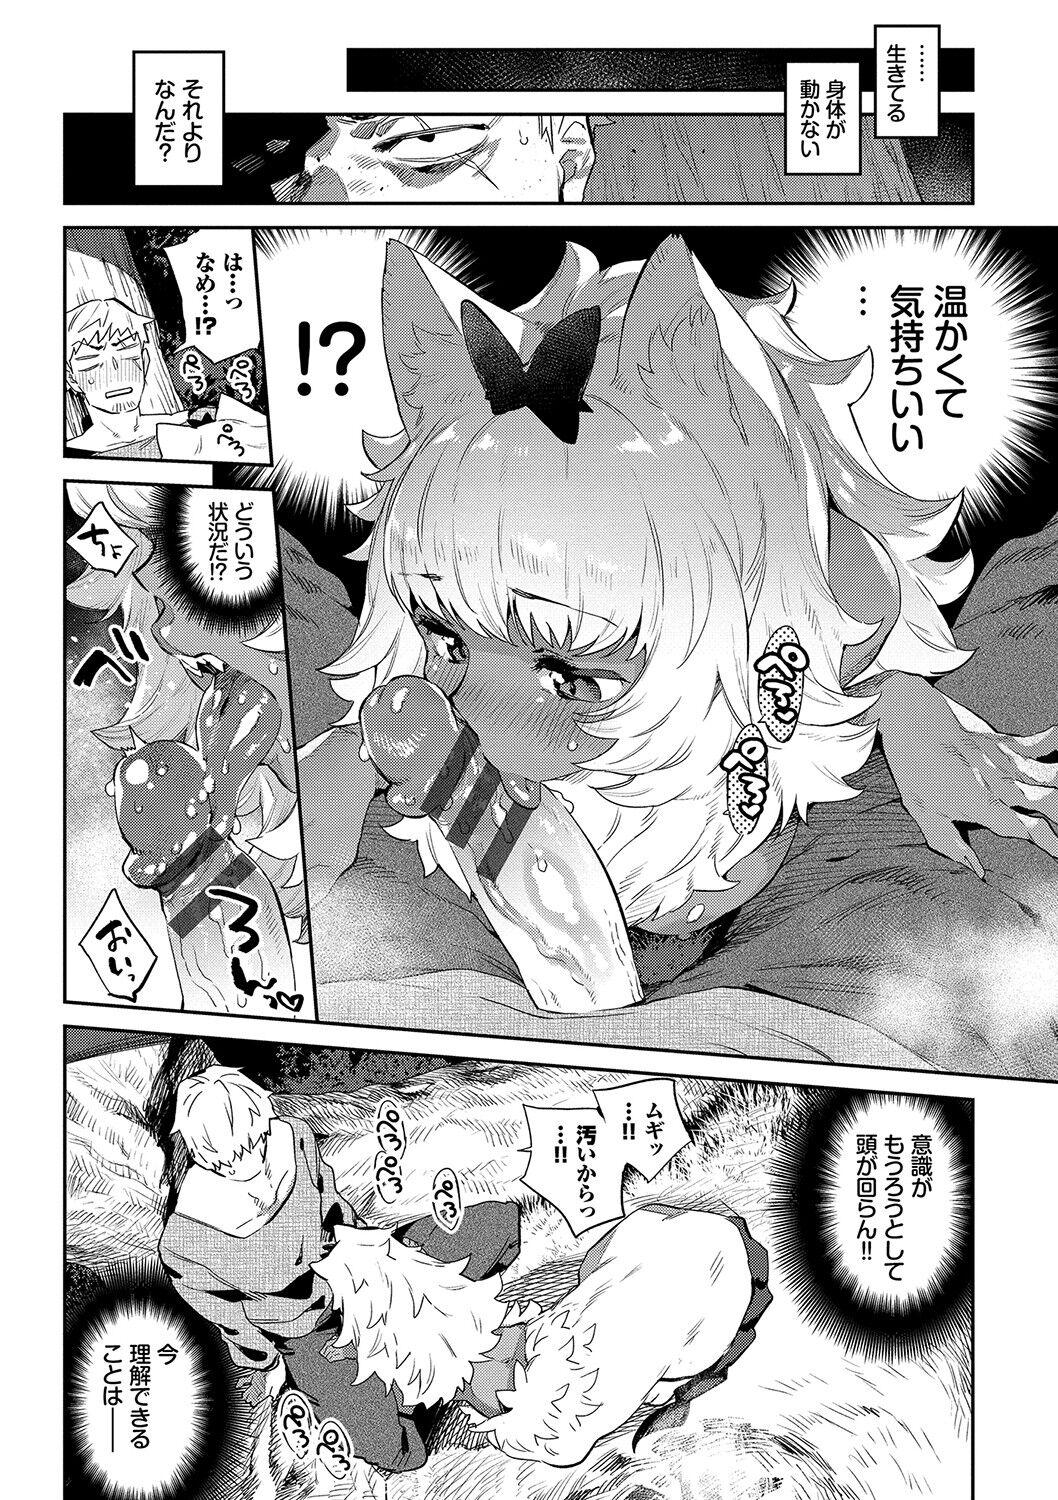 Ihou no Otome - Monster Girls in Another World 40